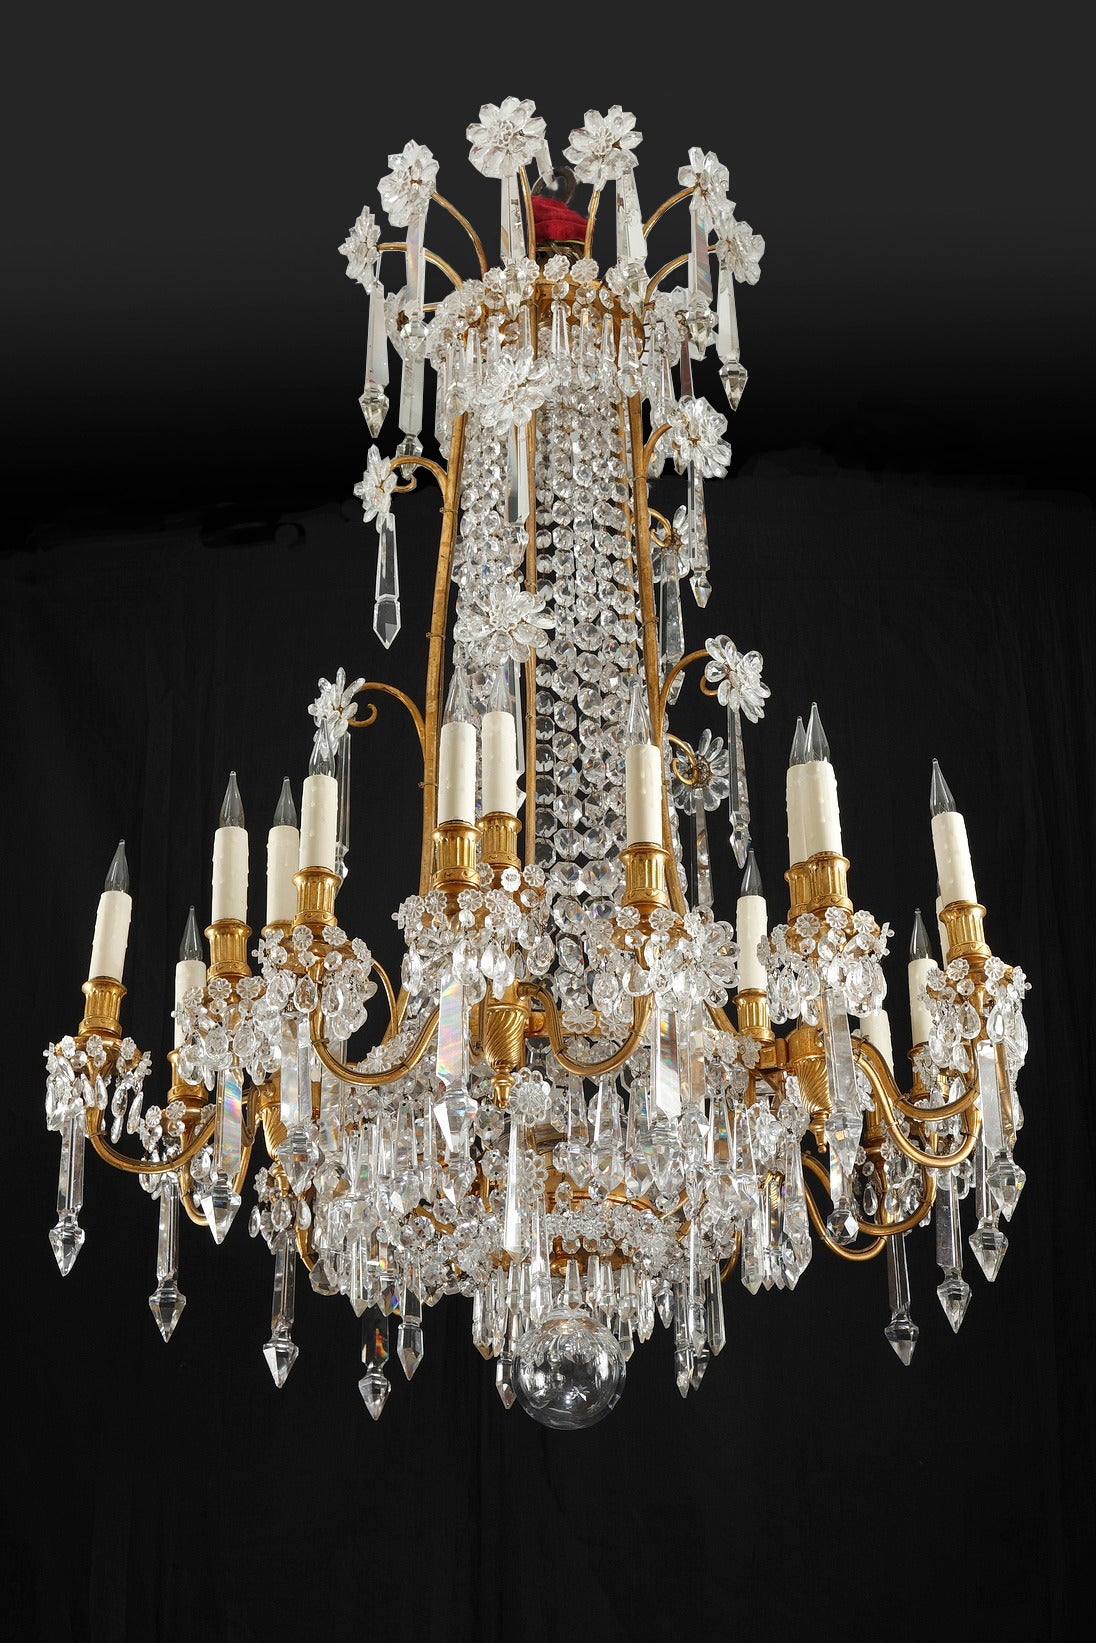 This magnificent chandelier is made of gilded bronze and crystal and presents twenty lights. The tubular shaft composed by garlands made of crystal octogones is adorned with crystal flower crowns. The lower part is fitted with a multitude of crystal